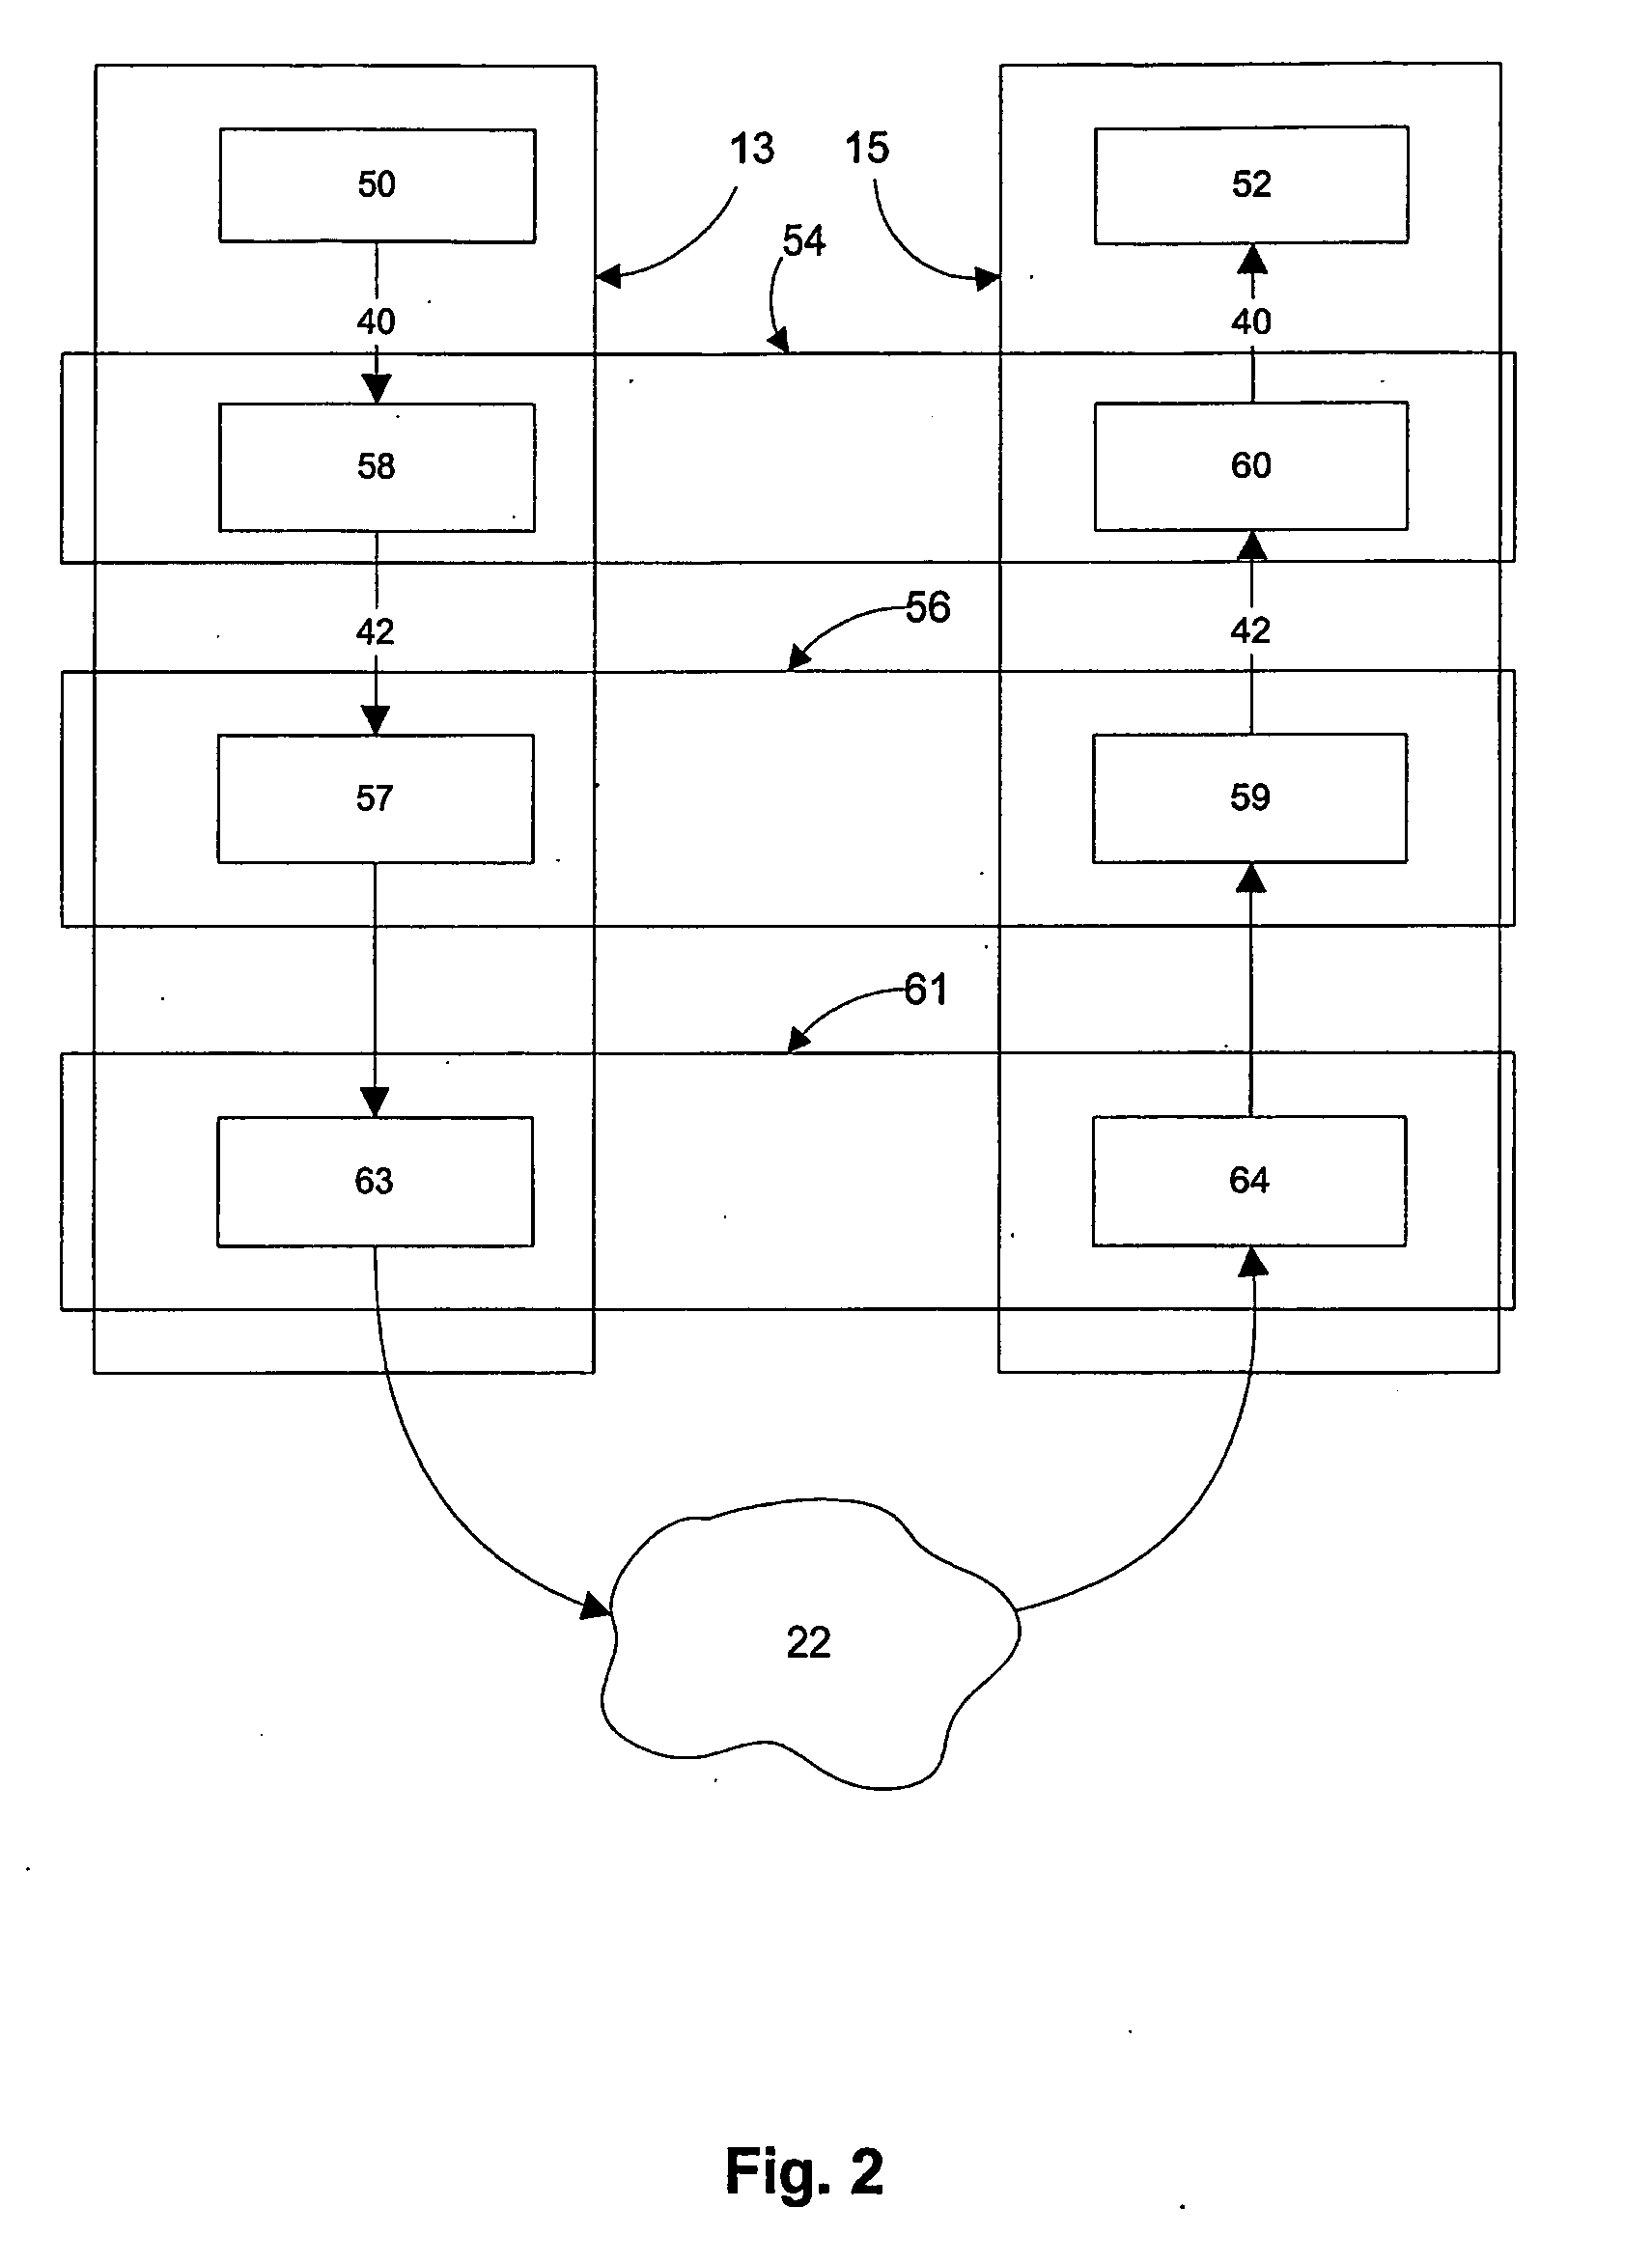 System and method for reliable packet data transport in a computer network